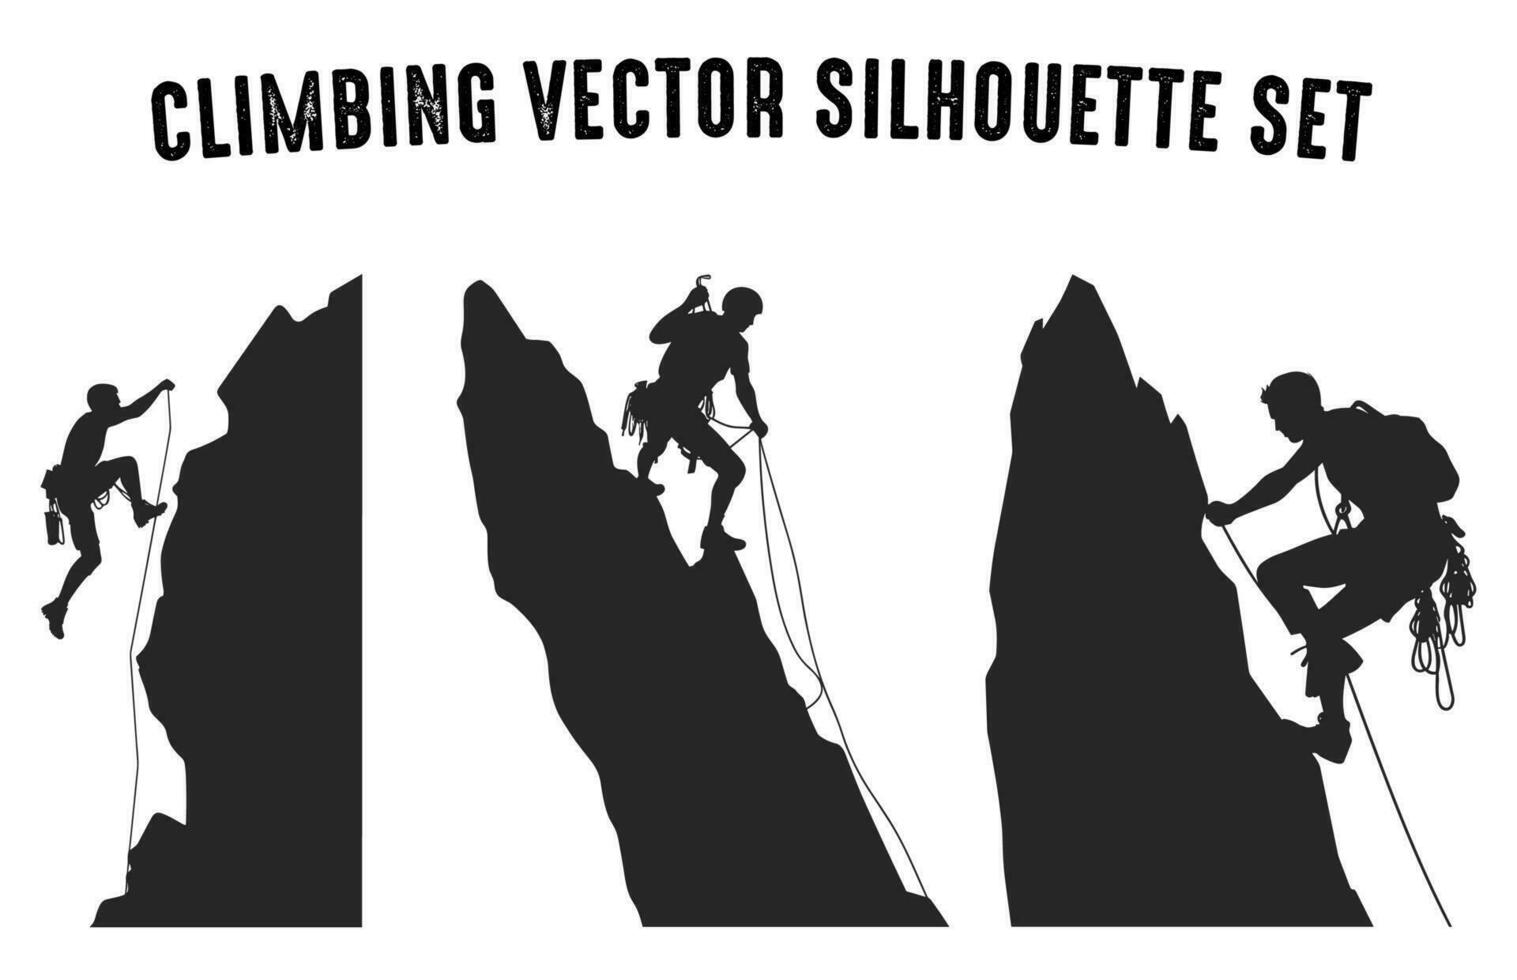 Free Climber Silhouettes Vector Bundle, Mountain Climbing Silhouettes in different poses, Rock climber black silhouette Set